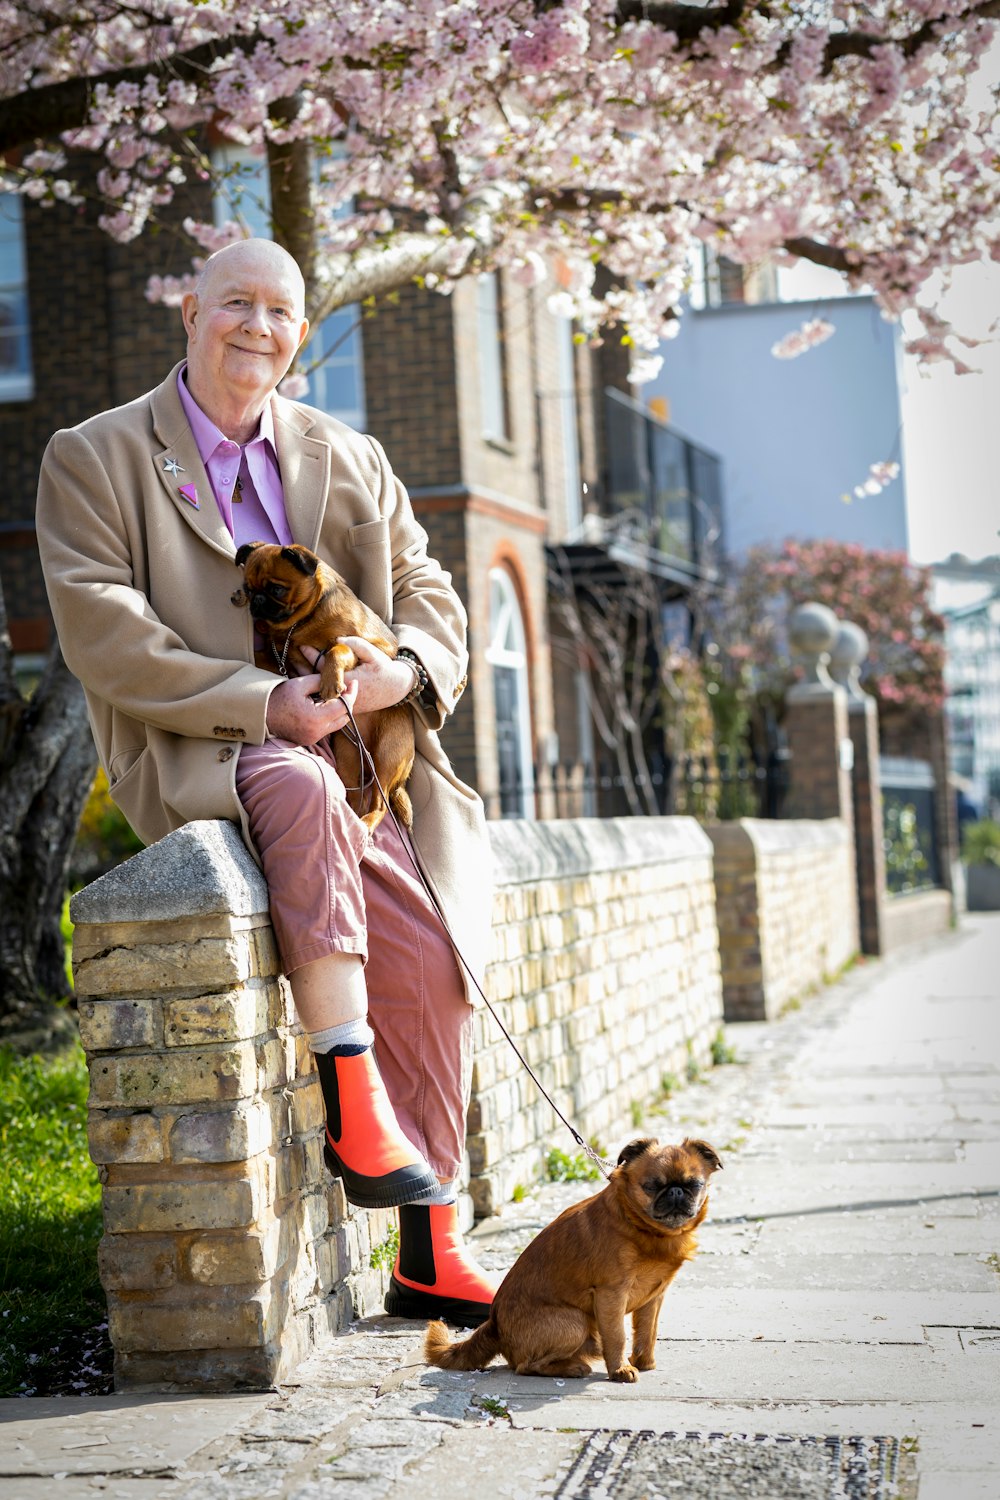 a person in a suit and red boots holding a dog